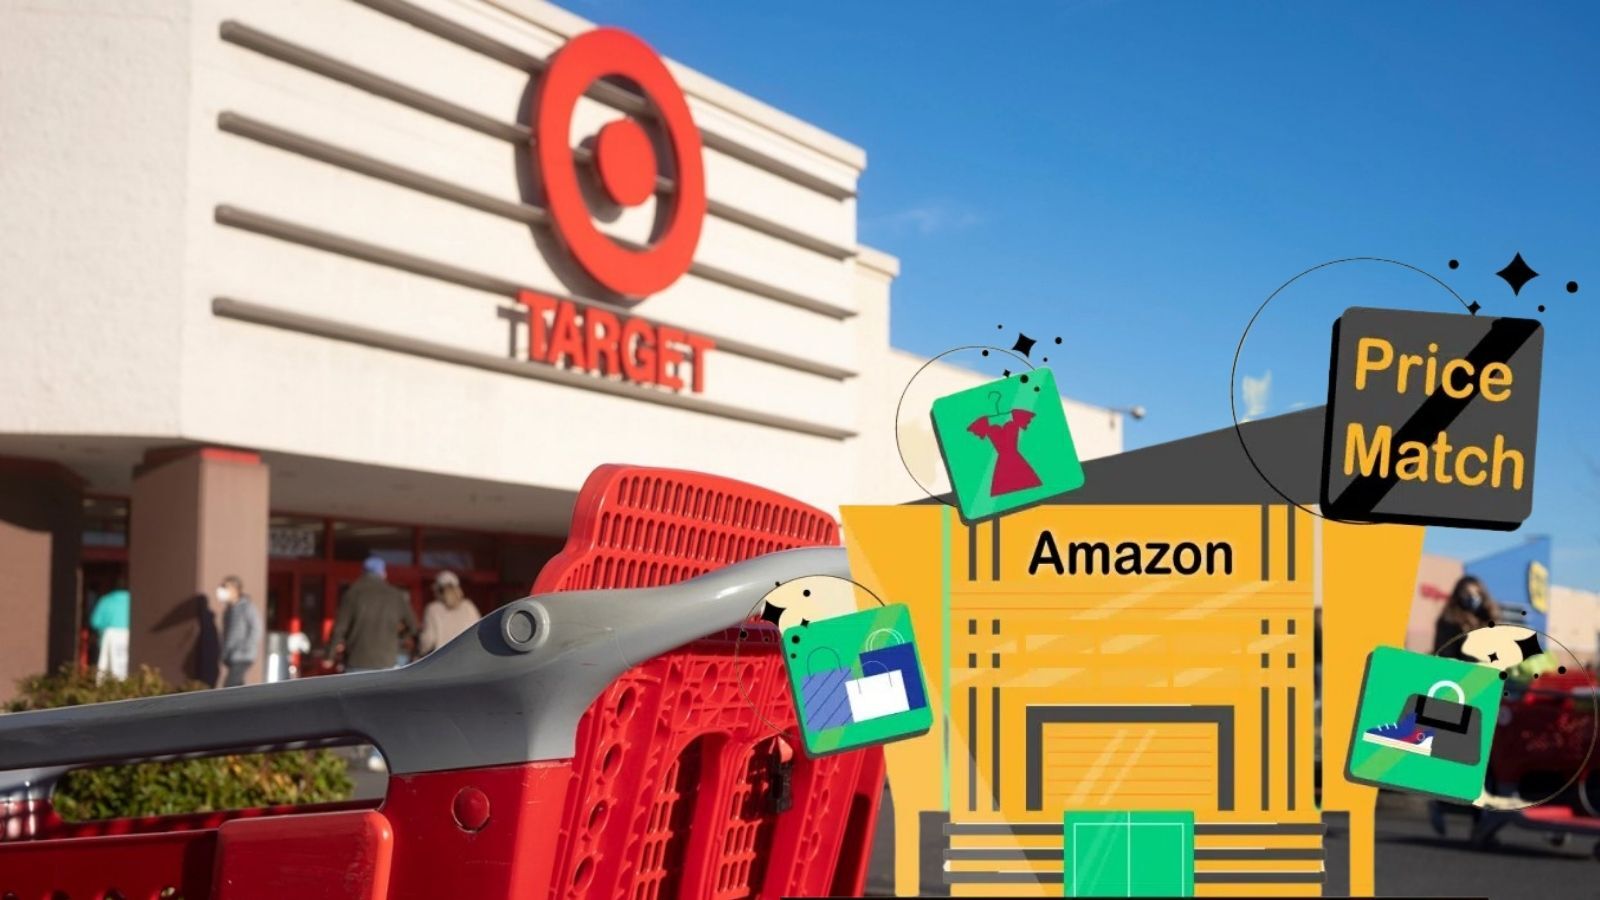 Does Target Price Match Amazon? (All You Need to Know) Cherry Picks